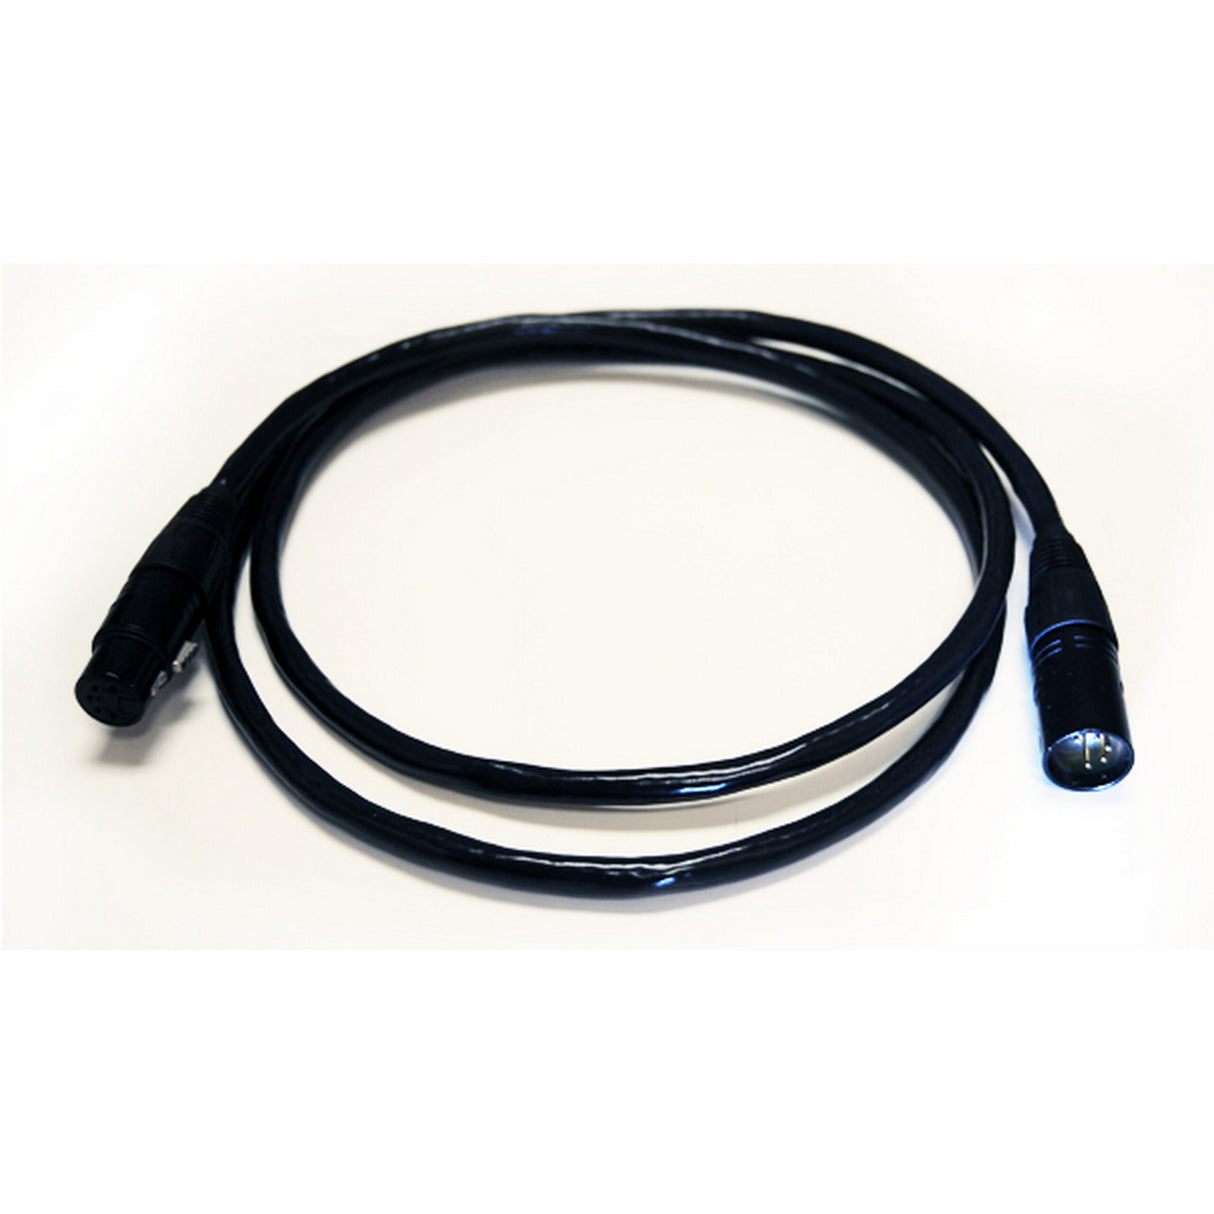 Whirlwind DMX05 DMX 5-Pin XLRF to XLRM Cable, 5-Feet